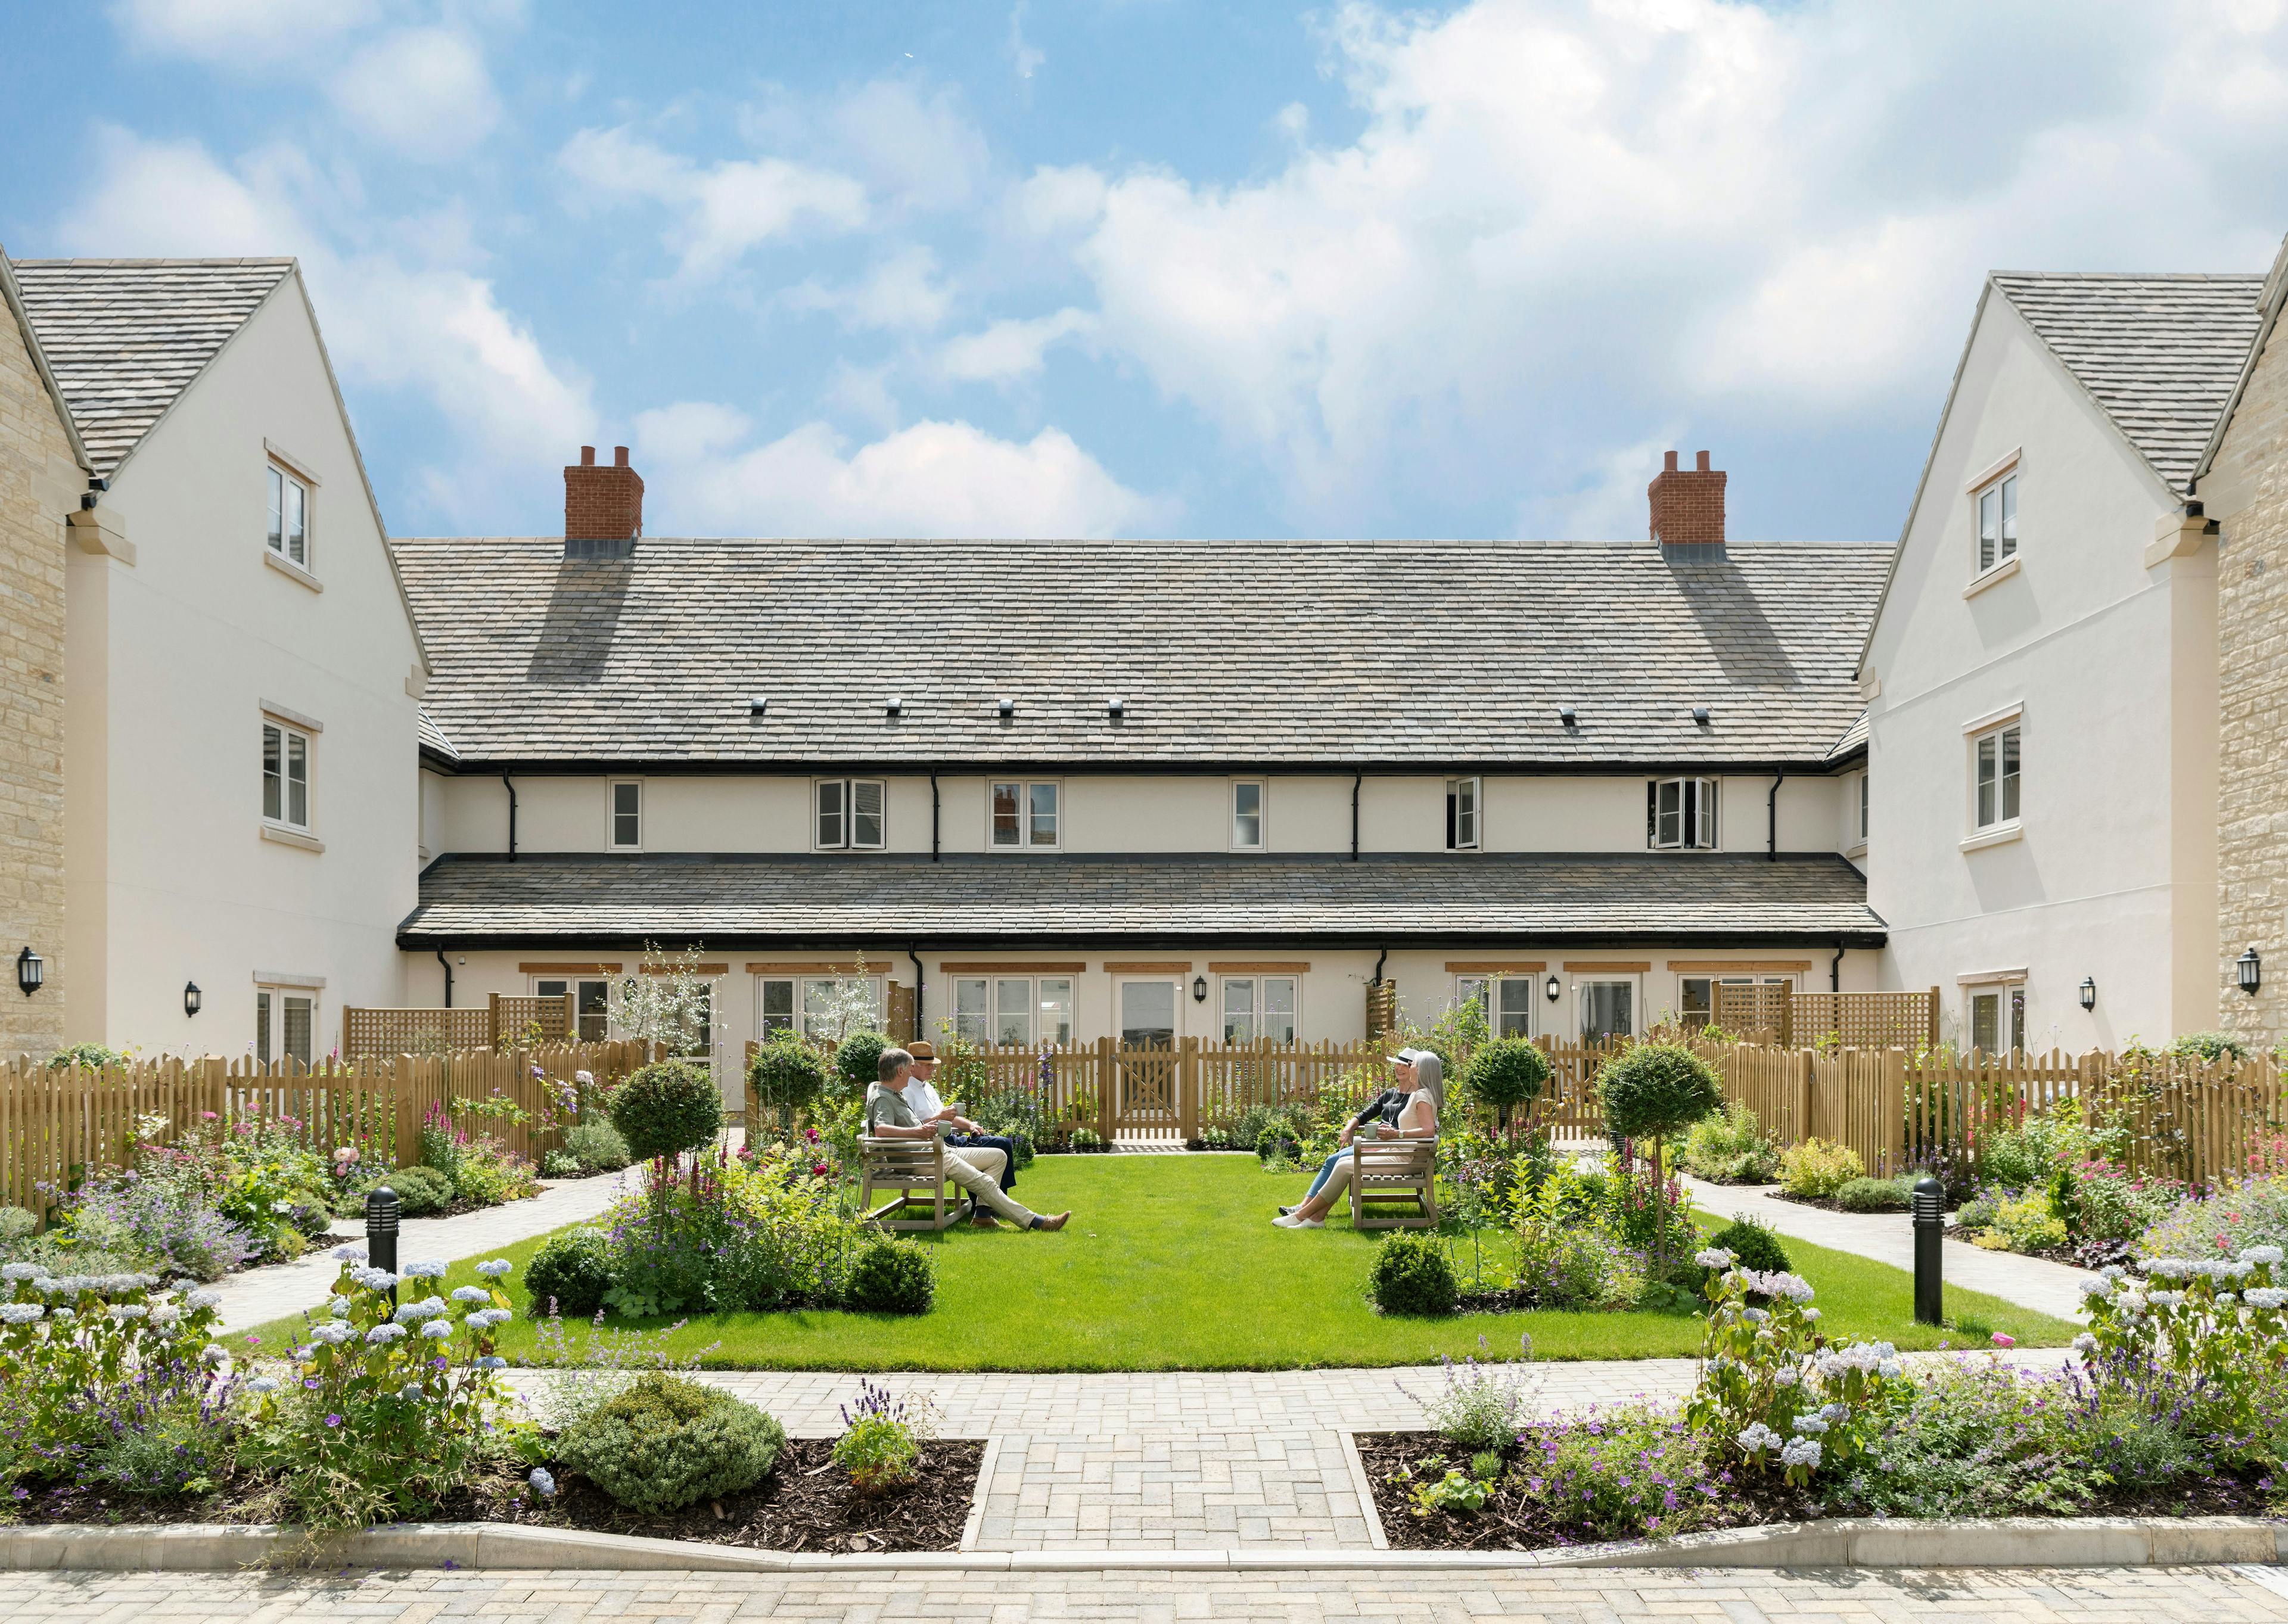 Exterior of Cotswold Gate retirement development in Burford, Oxfordshire